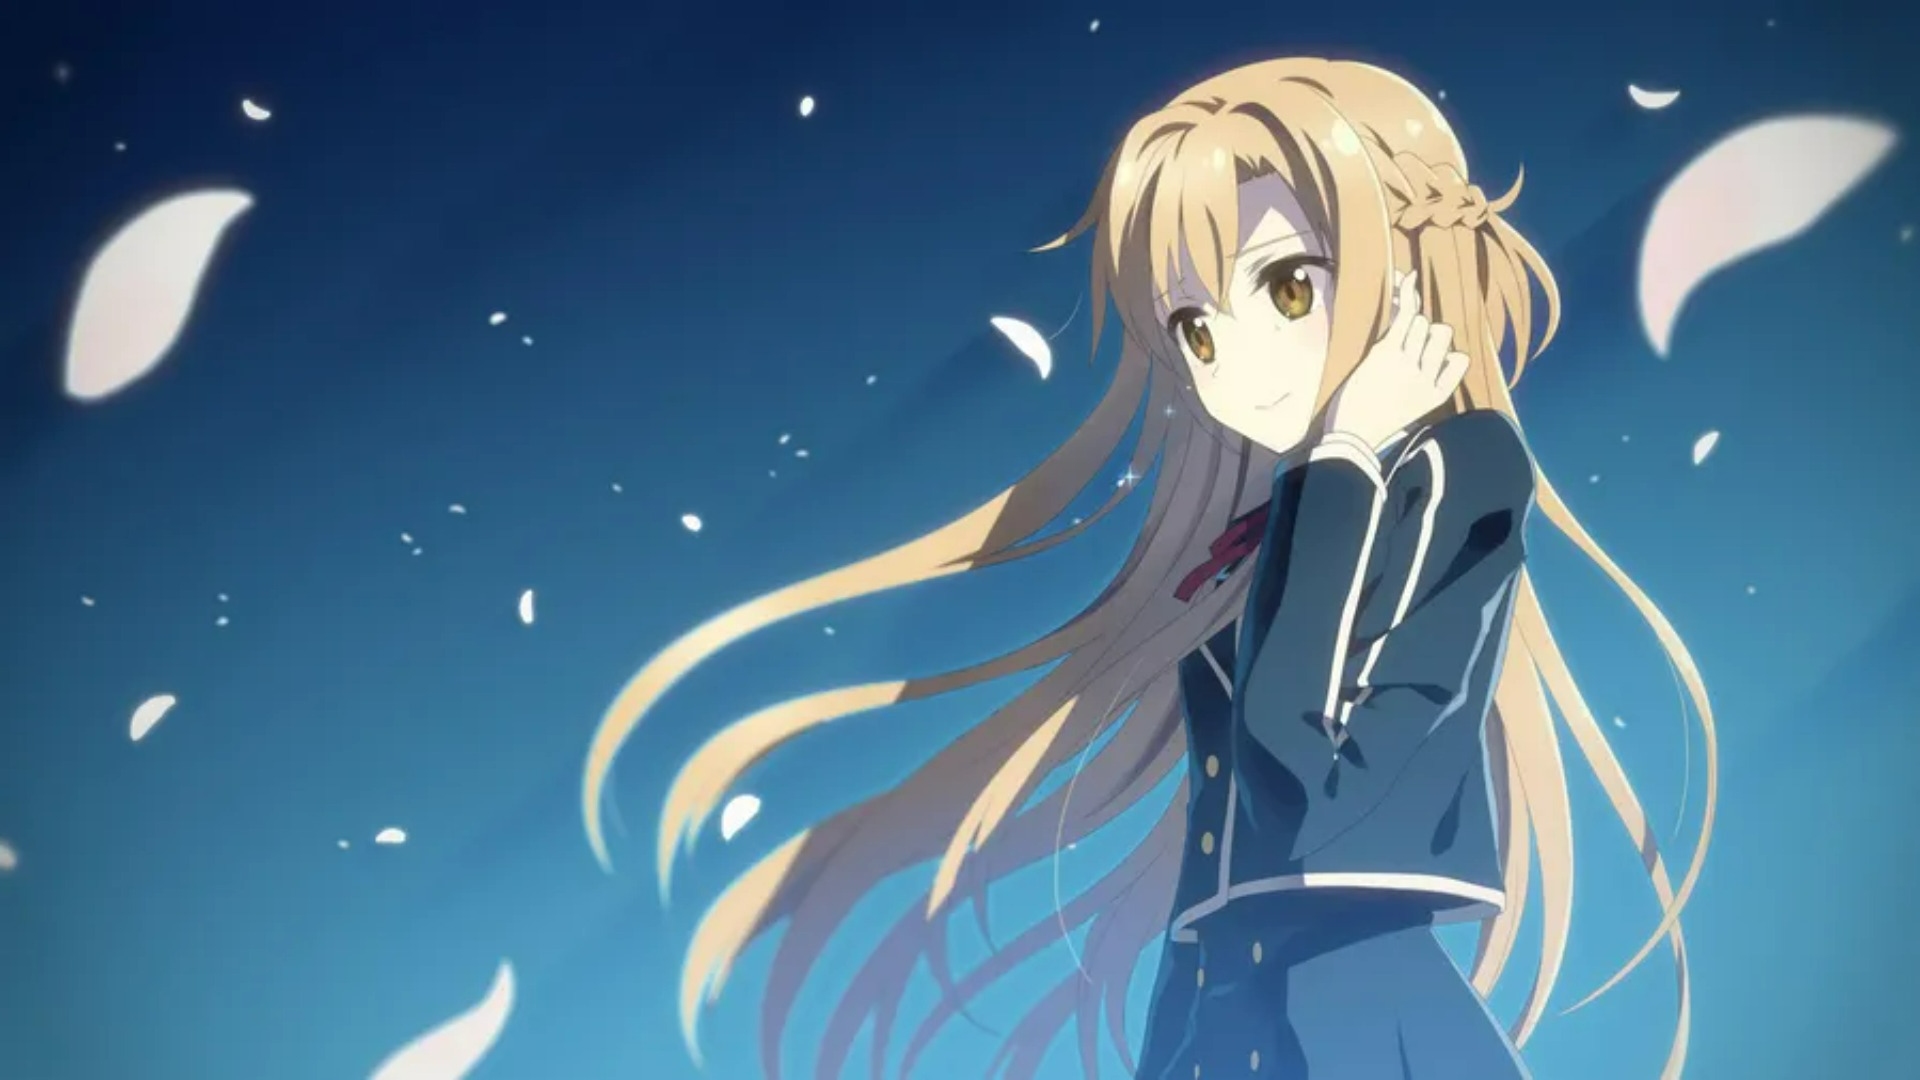 Asuna Background Images